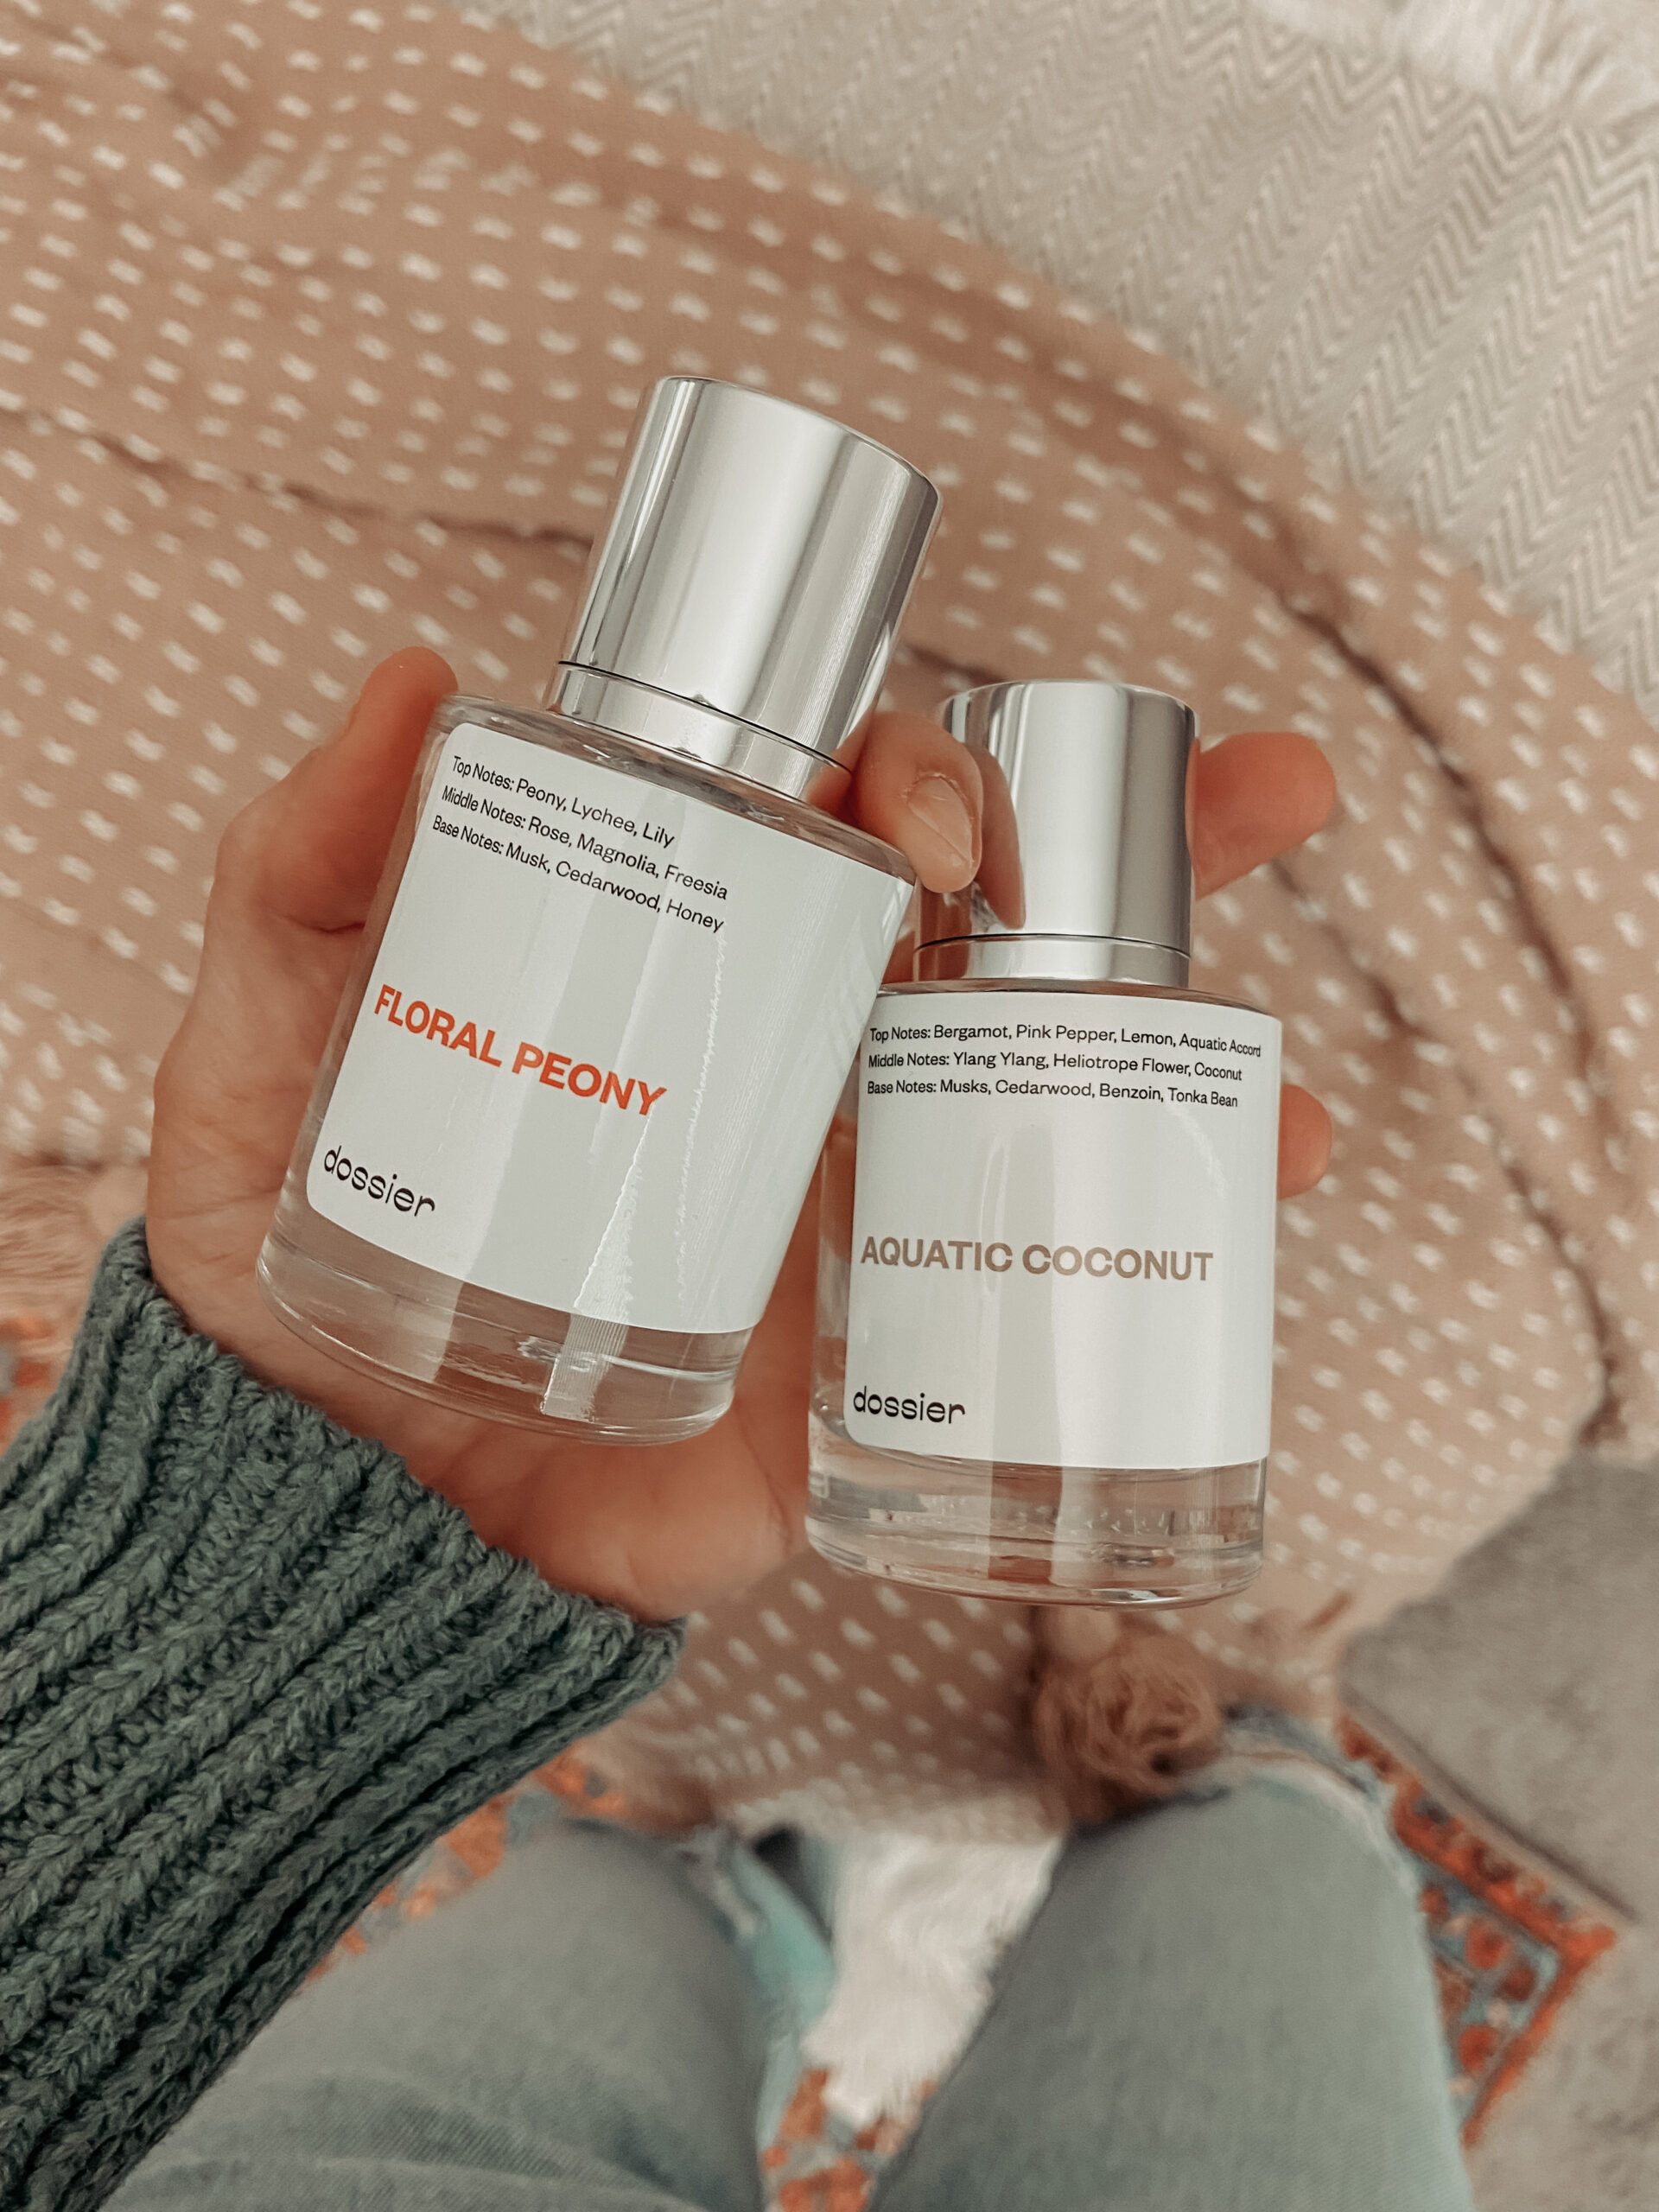 DOSSIER FRAGRANCE FROM WALMART- Jaclyn De Leon Style + sharing my new favorite fragrances from Dossier. Clean beauty at an affordable price. Designer for less